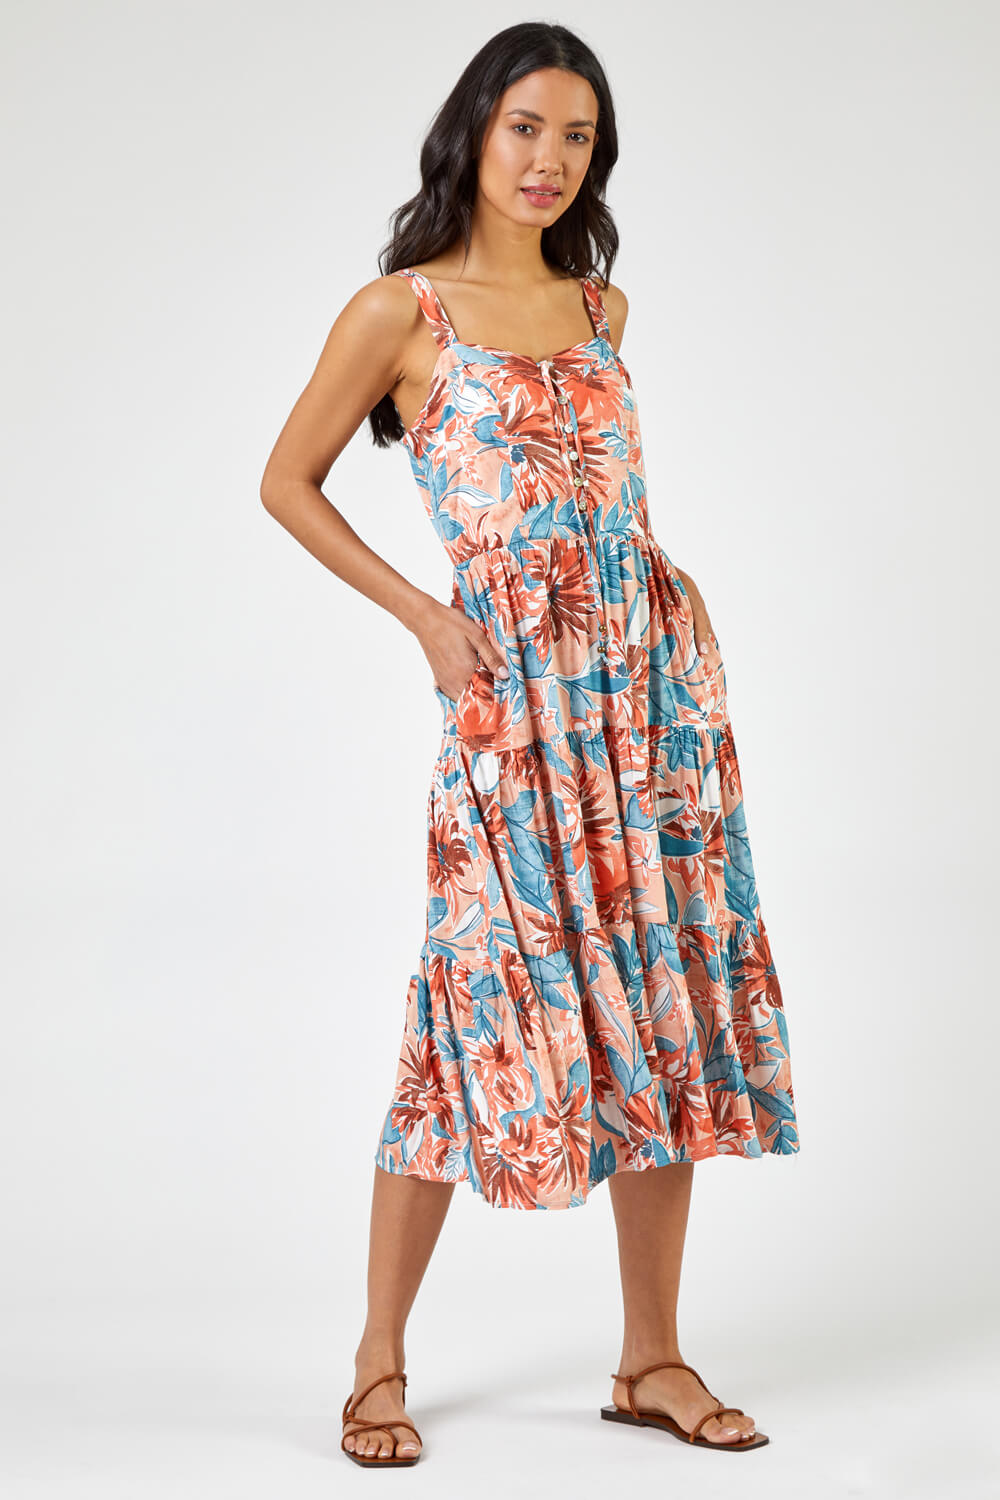 CORAL Tropical Floral Tiered Pocket Midi Dress, Image 3 of 5